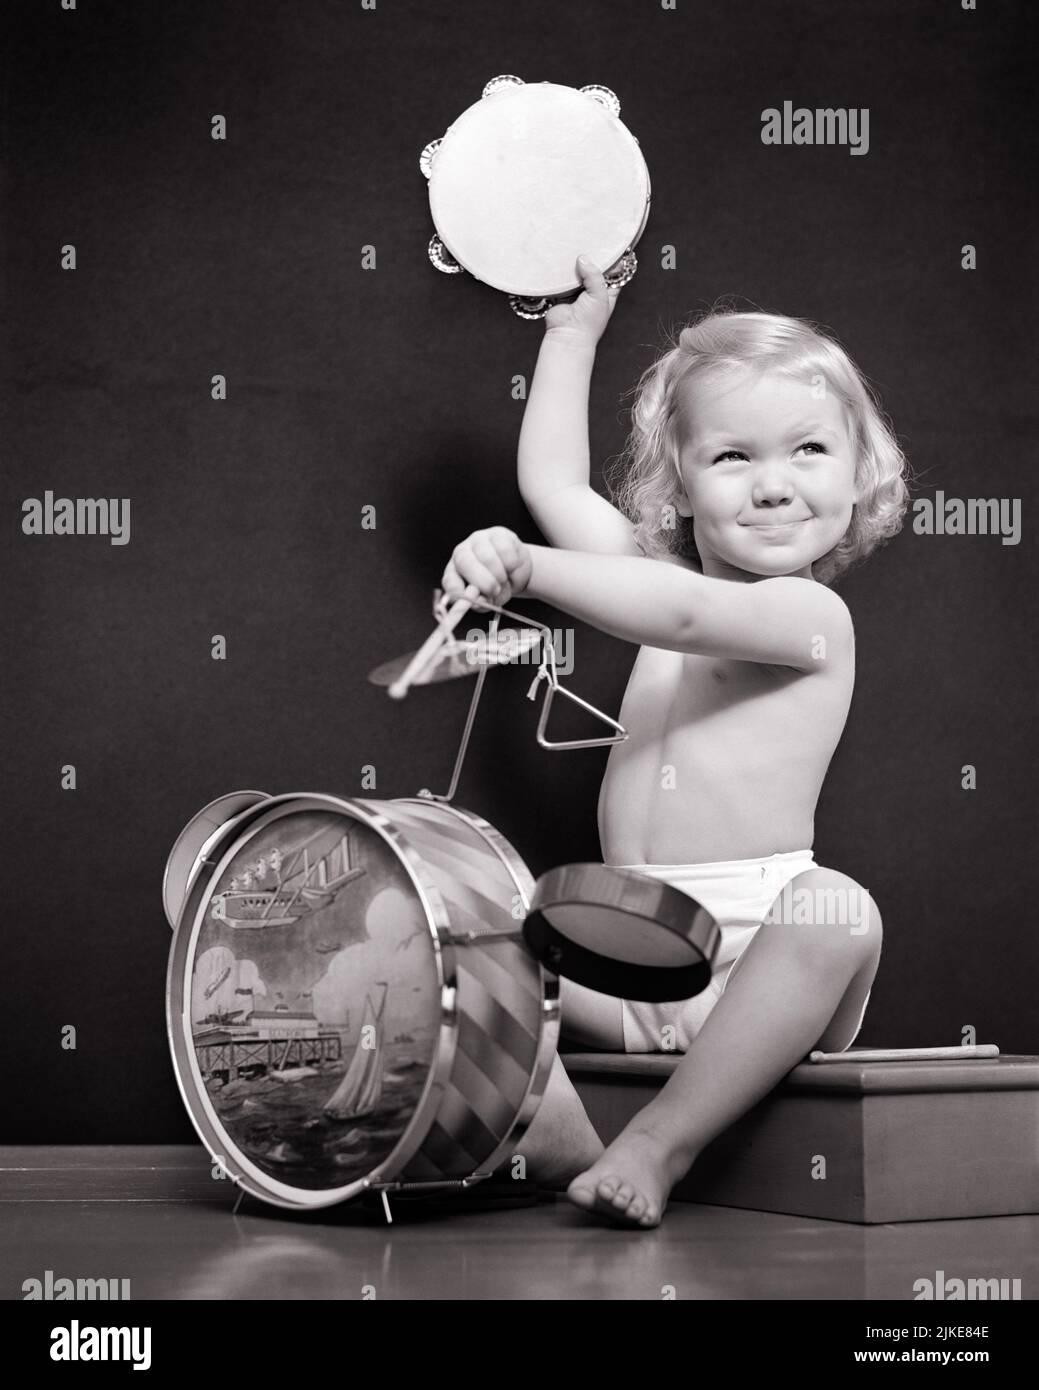 1940s SMILING BLONDE GIRL PLAYING DRUMS SET WITH CYMBALS AND TRIANGLE RAISING A TAMBOURINE LIKE A ONE MAN BAND LOOKING UP - j4802 HAR001 HARS HEALTHINESS HOME LIFE COPY SPACE HALF-LENGTH DRUMS TRIANGLE INSPIRATION PERFORMANCE RAISING ENTERTAINMENT B&W GOALS CYMBALS HAPPINESS CHEERFUL DISCOVERY PERFORMER AND EXCITEMENT LOW ANGLE PRIDE UP ENTERTAINER LIKE OCCUPATIONS SMILES MUSICAL INSTRUMENT BARE FEET ACTORS DRUMMER JOYFUL ONE-MAN BAND DRUMMING ENTERTAINERS GROWTH JUVENILES ONE MAN BAND PERFORMERS SOLUTIONS TAMBOURINE BLACK AND WHITE CAUCASIAN ETHNICITY HAR001 OLD FASHIONED Stock Photo